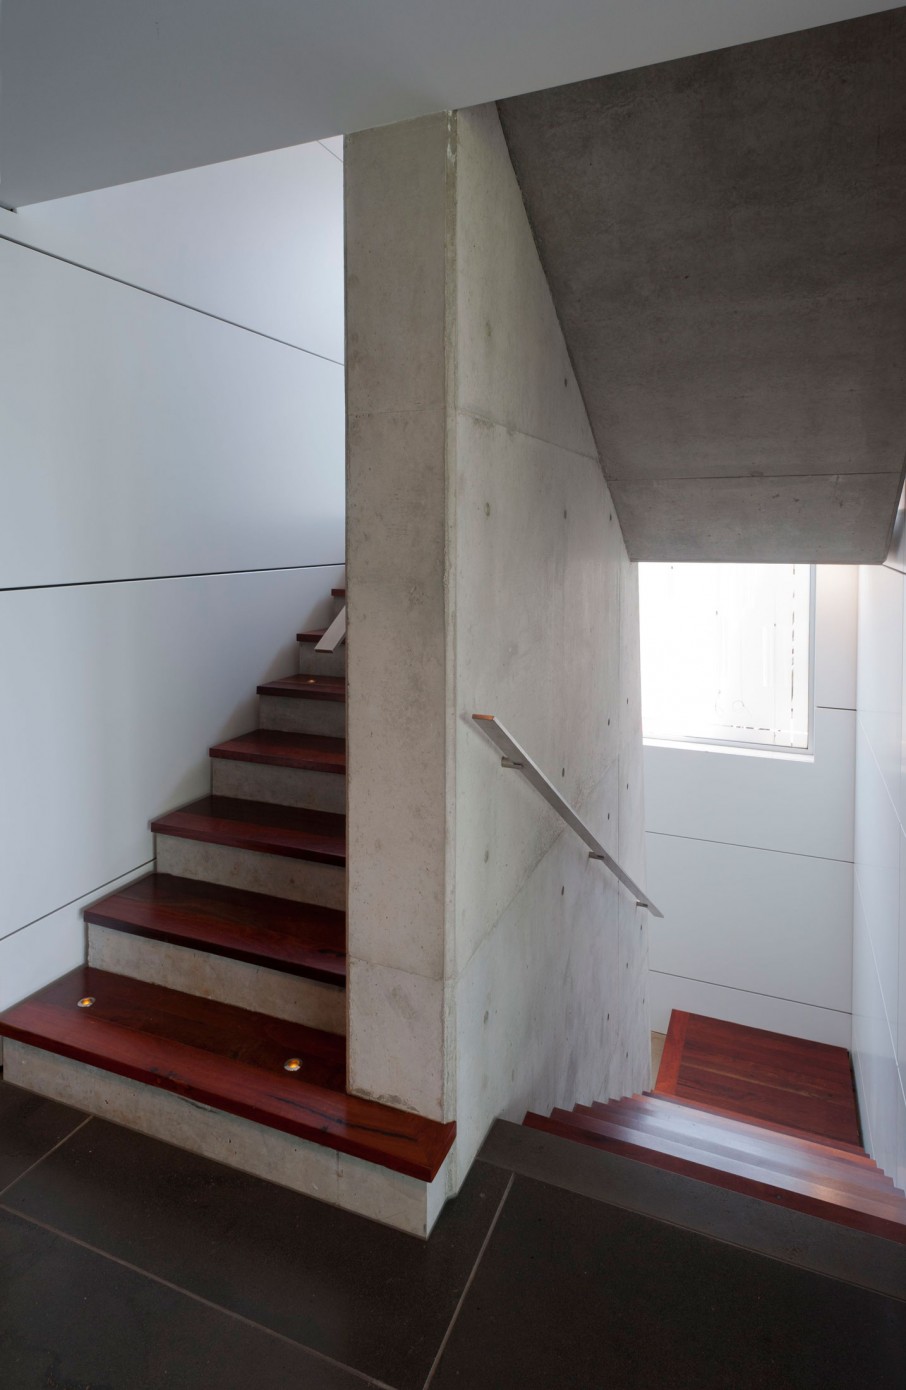 Maribyrnong House With Contemporary Maribyrnong House Indoor Staircase With Wooden Steps And In Ground Lighting As Illumination Architecture Lavish And Breathtaking Contemporary Home With Spectacular Exterior Appearance